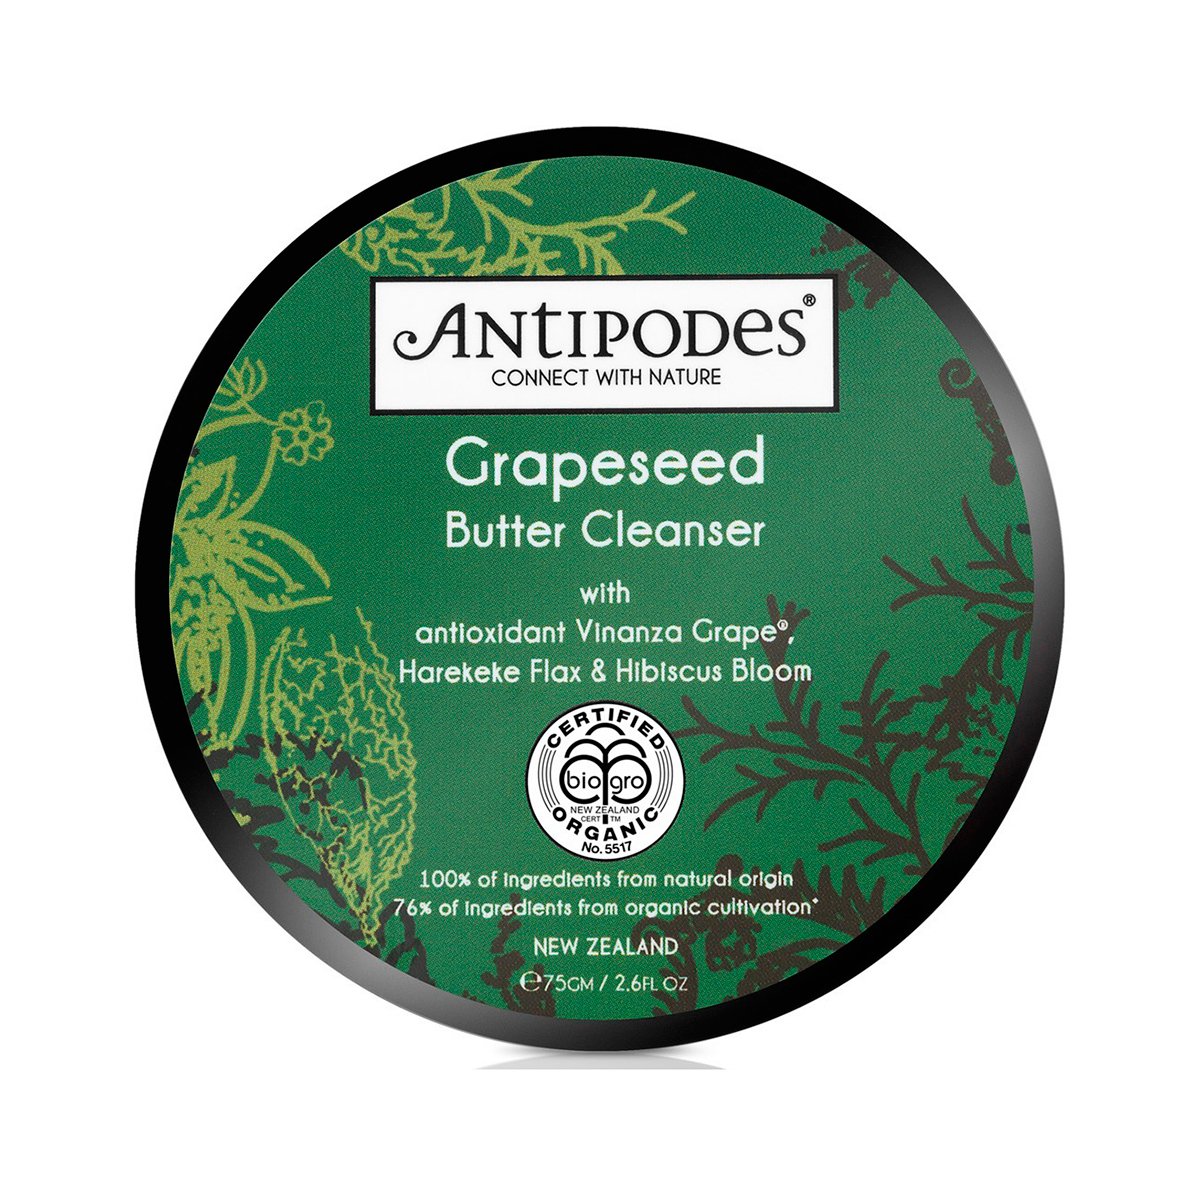 Antipodes Grapeseed Butter Cleanser 75g / 2.6 fl oz